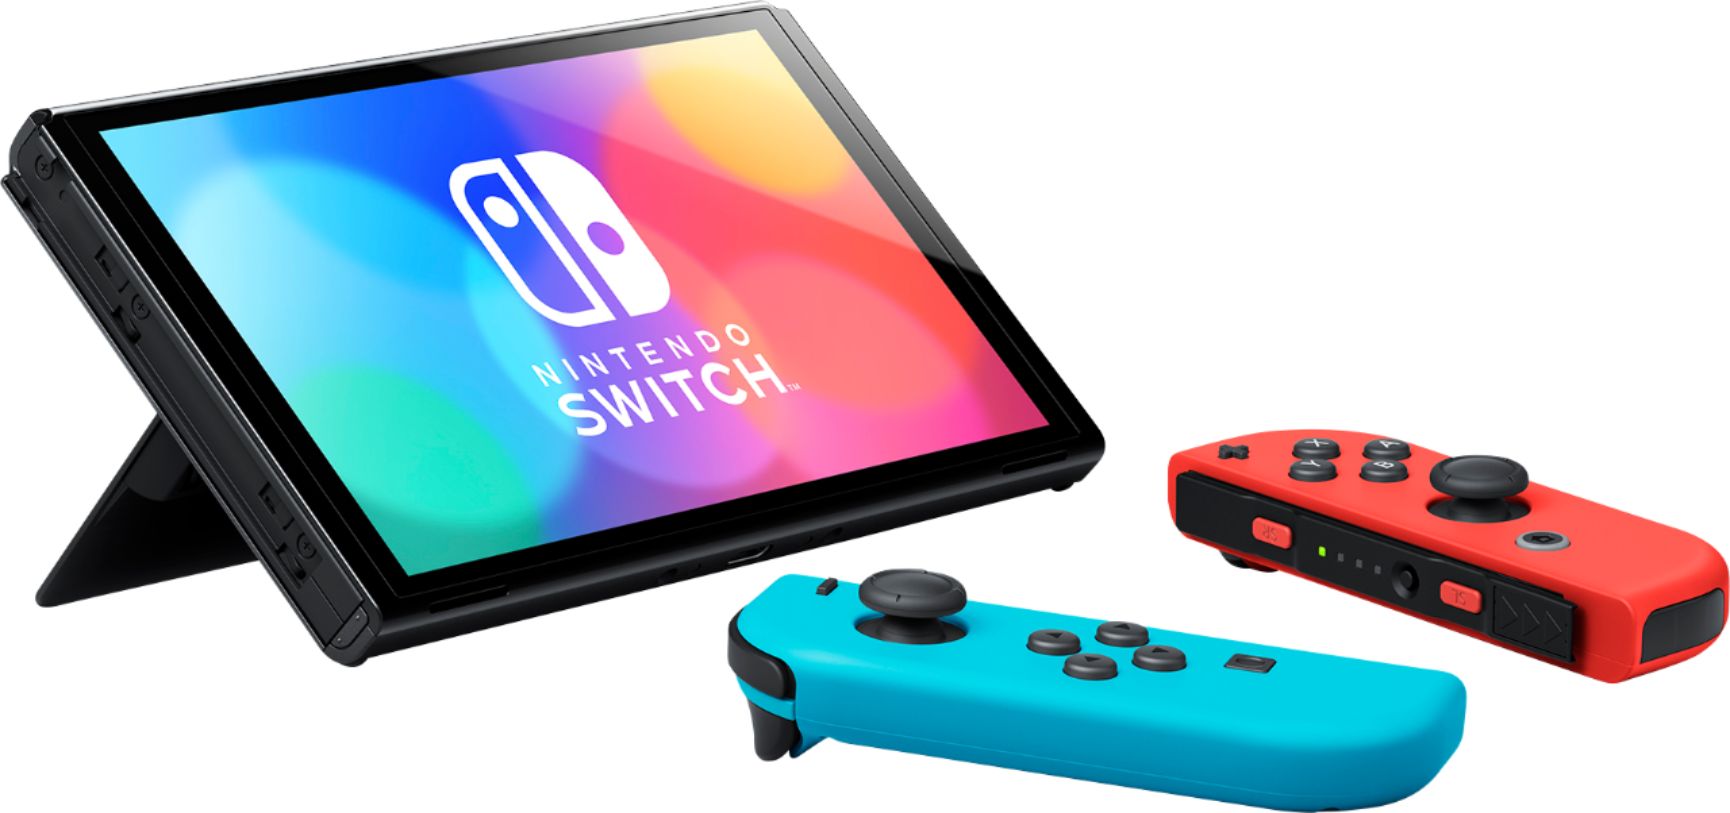 2022 New Nintendo Switch OLED Model Neon Red & Blue Joy Con 64GB Console HD Screen & LAN-Port Dock with Mario Golf: Super Rush, Mytrix 128GB MicroSD Card and Accessories